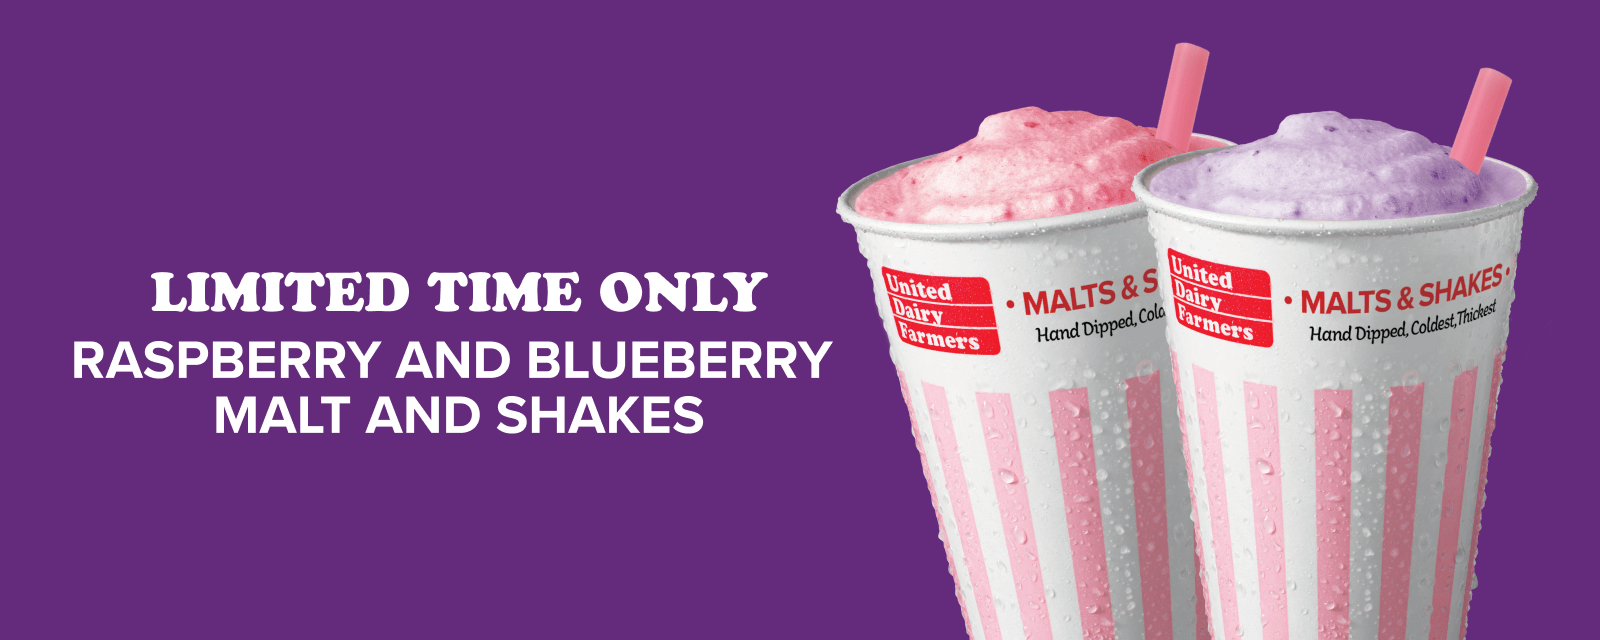 Limited Time Only! Raspberry and Blueberry Malts and Shakes